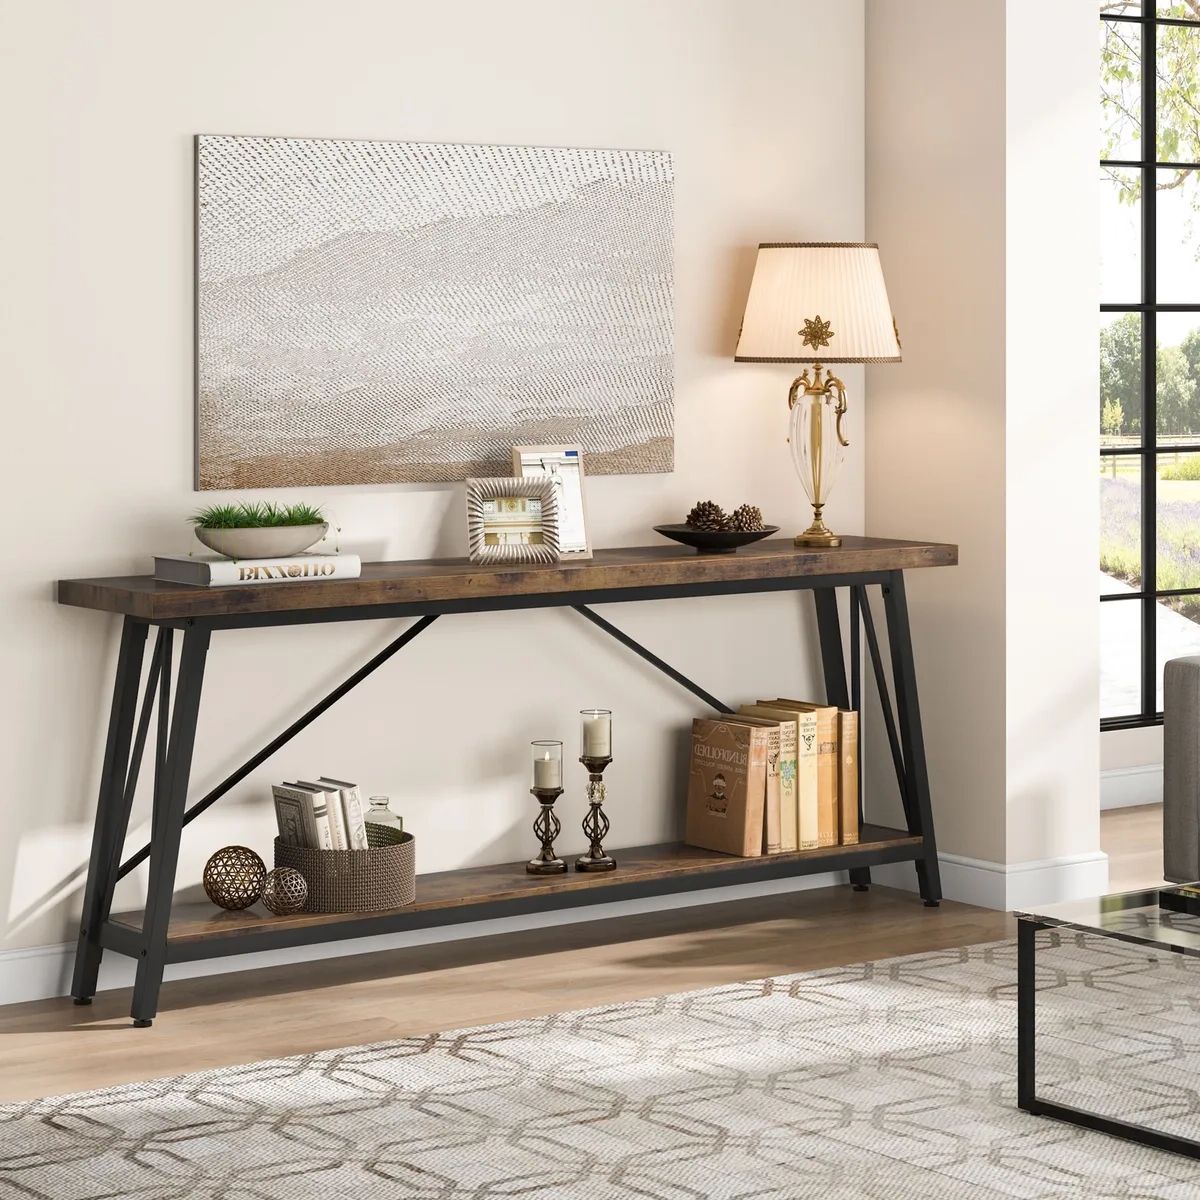 Long Narrow Console Table With Storage Behind Couch Sofa Table Entryway  Hallway | Ebay In Asymmetrical Console Table Book Stands (View 6 of 20)